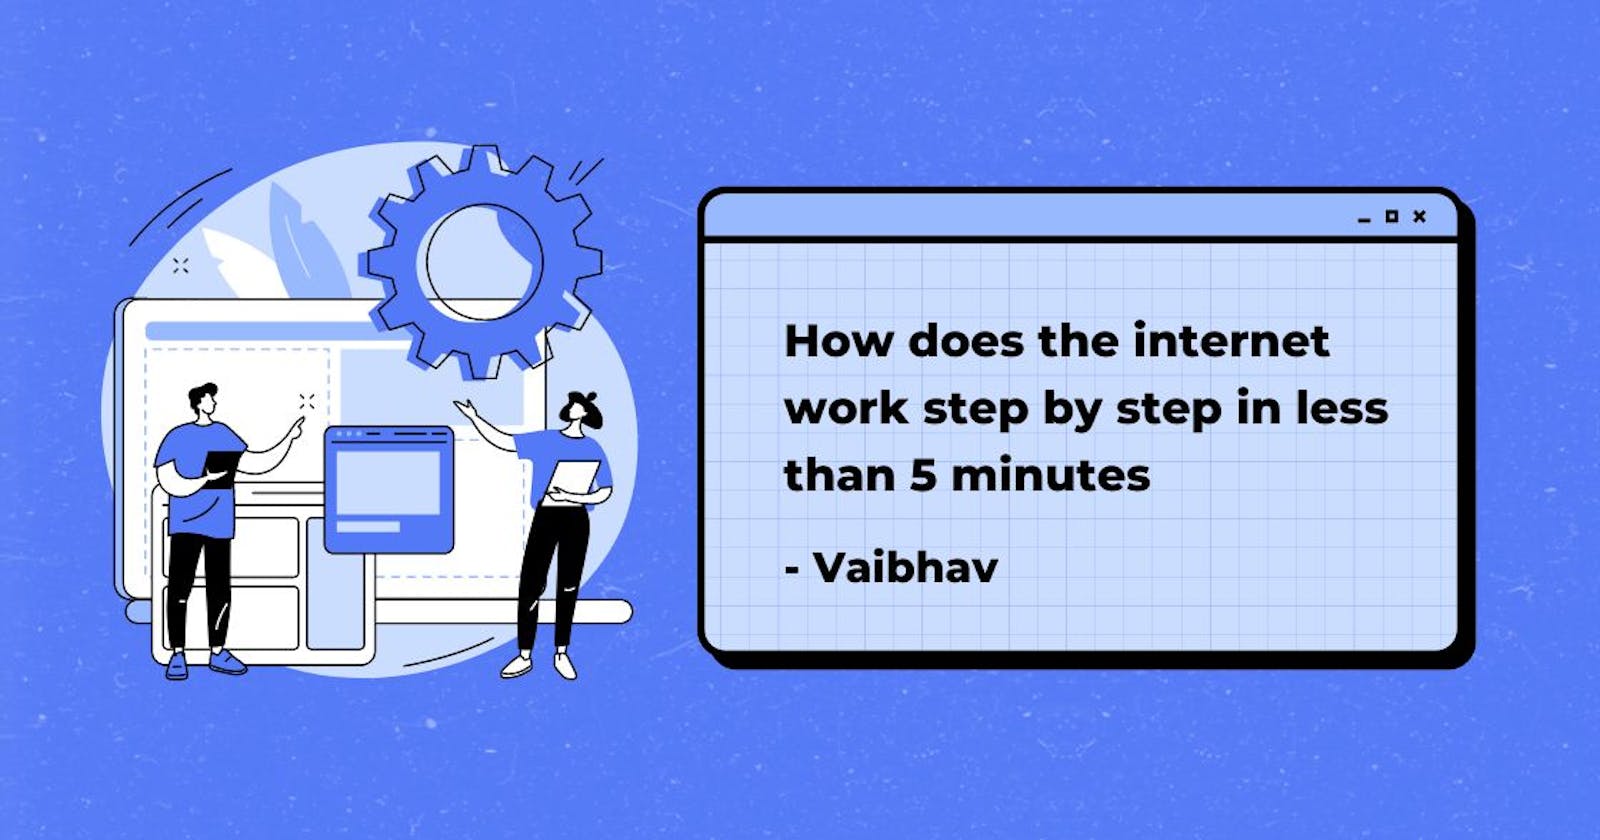 How does the internet work step by step in less than 5 minutes